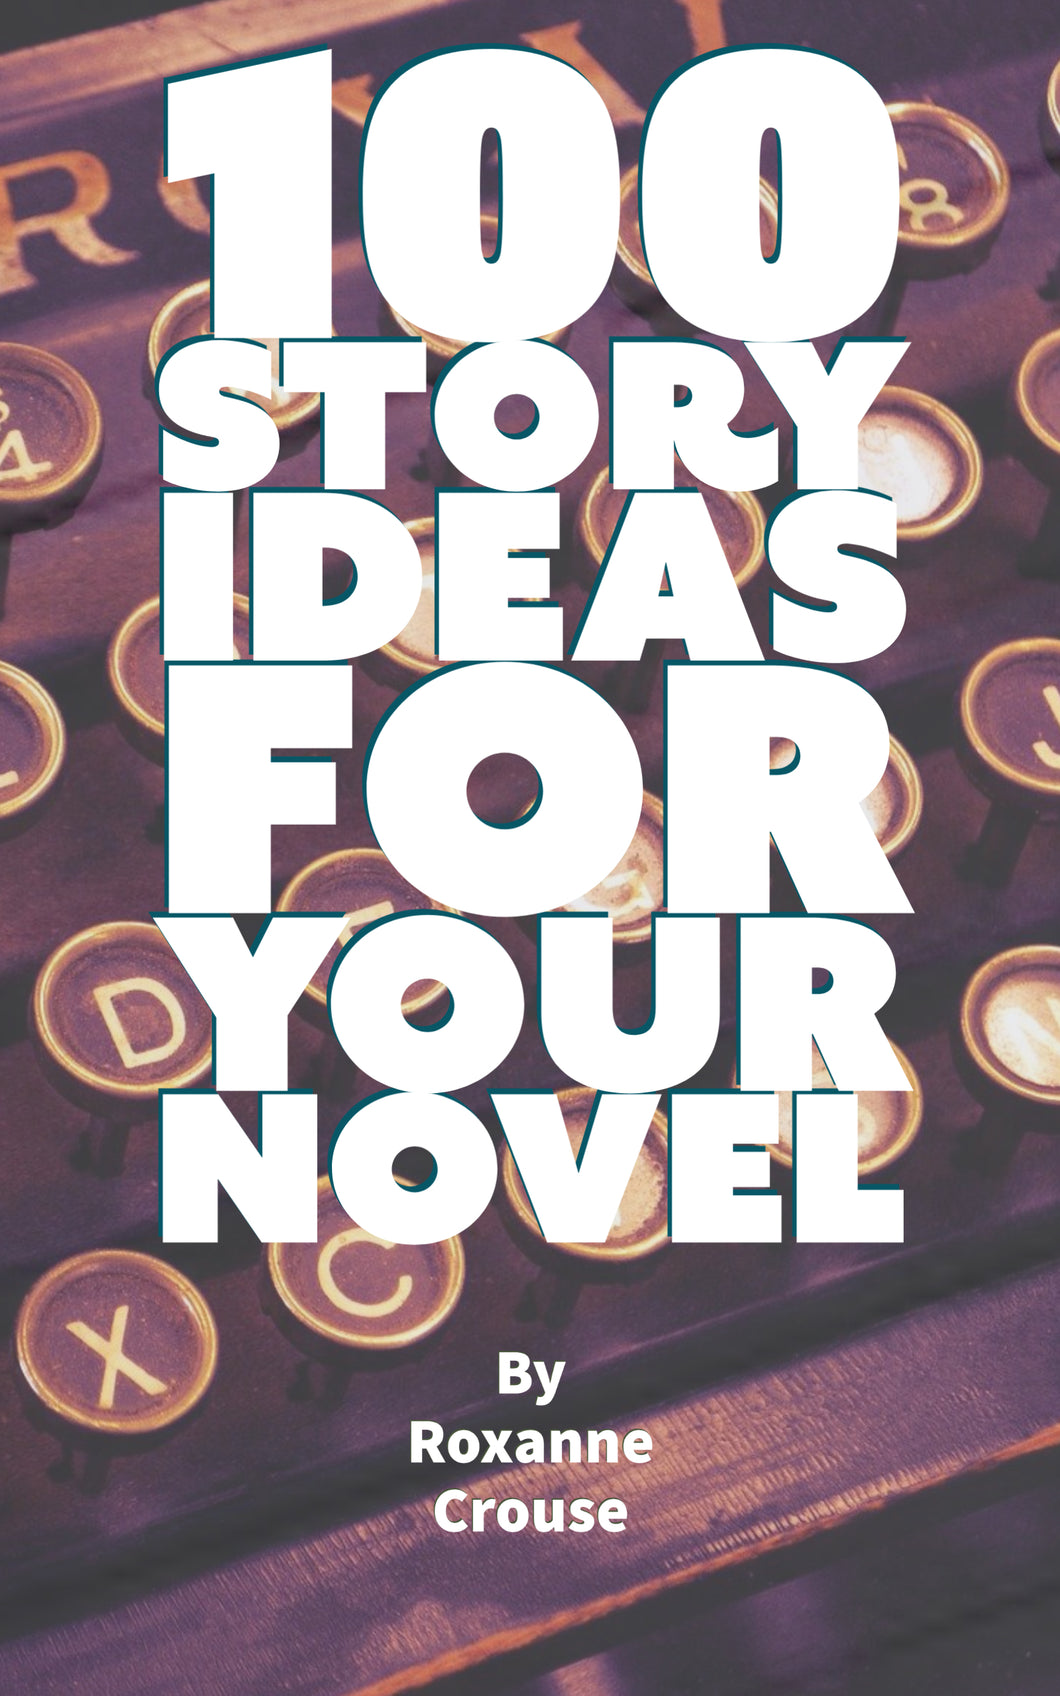 100 Story Ideas For Your Novel eBook PDF: Unleash Your Imagination with this Downloadable eBook PDF! 🖋️📖